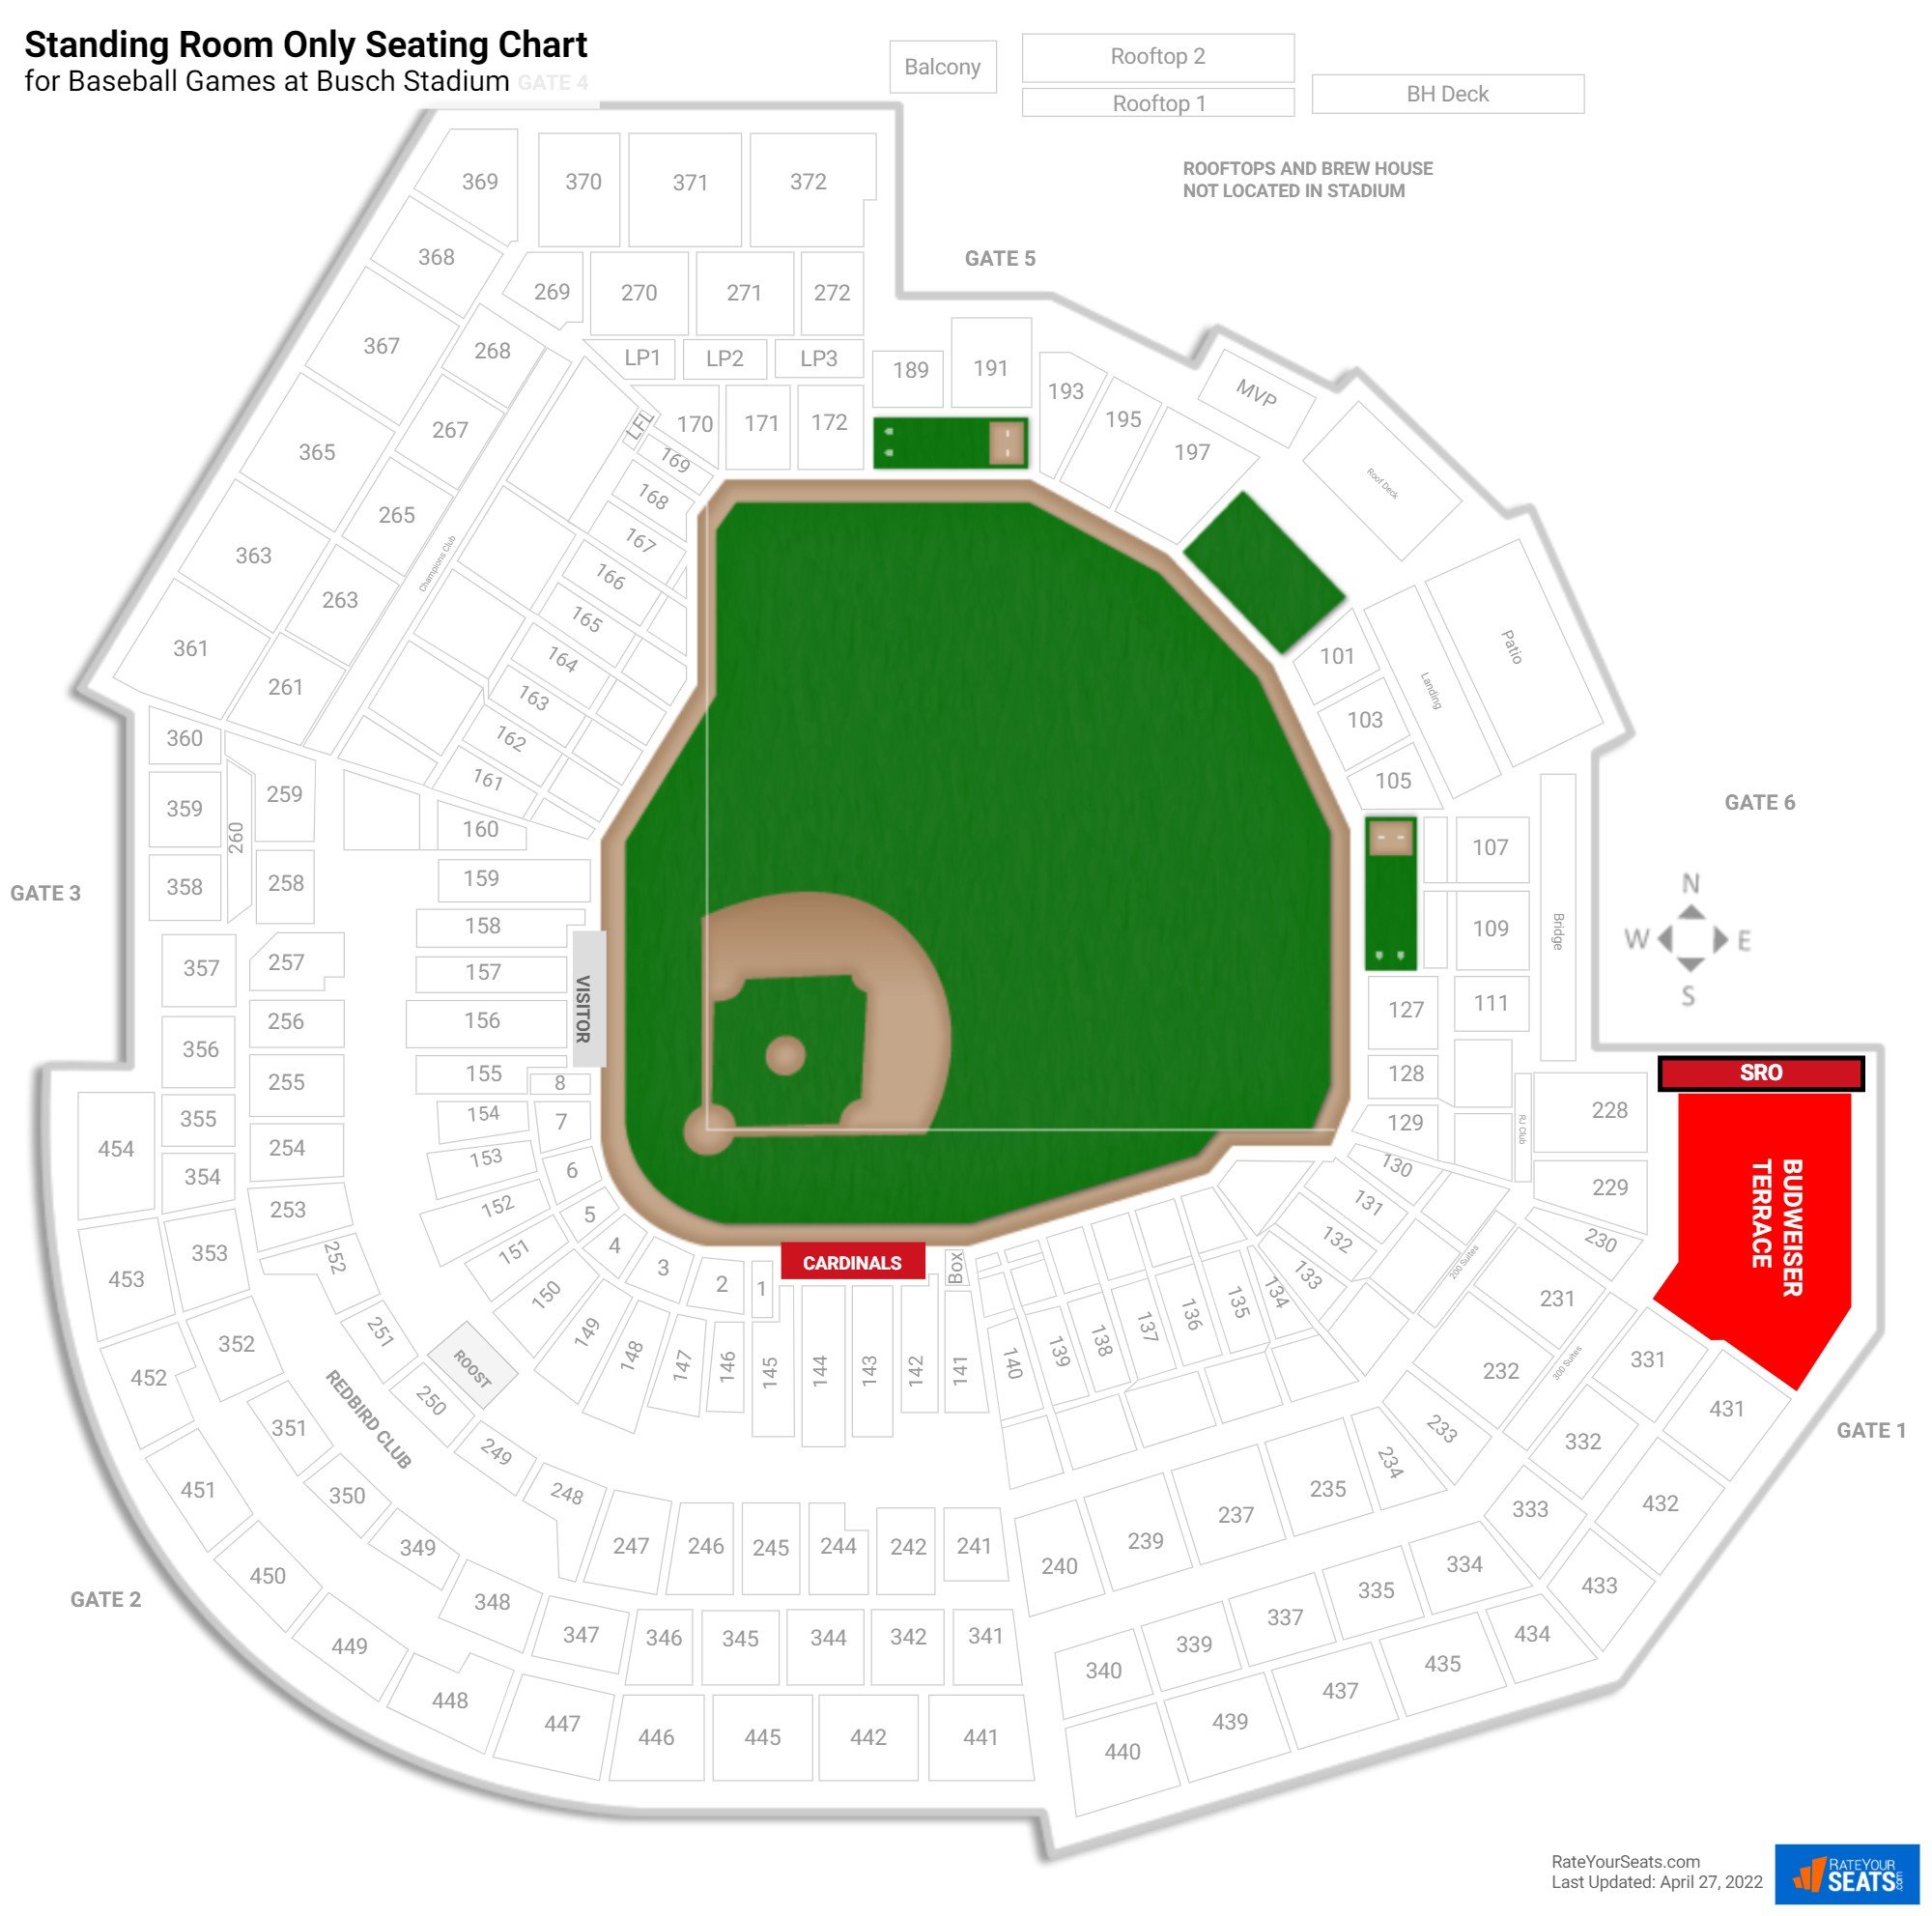 Baseball Standing Room Only Seating Chart at Busch Stadium